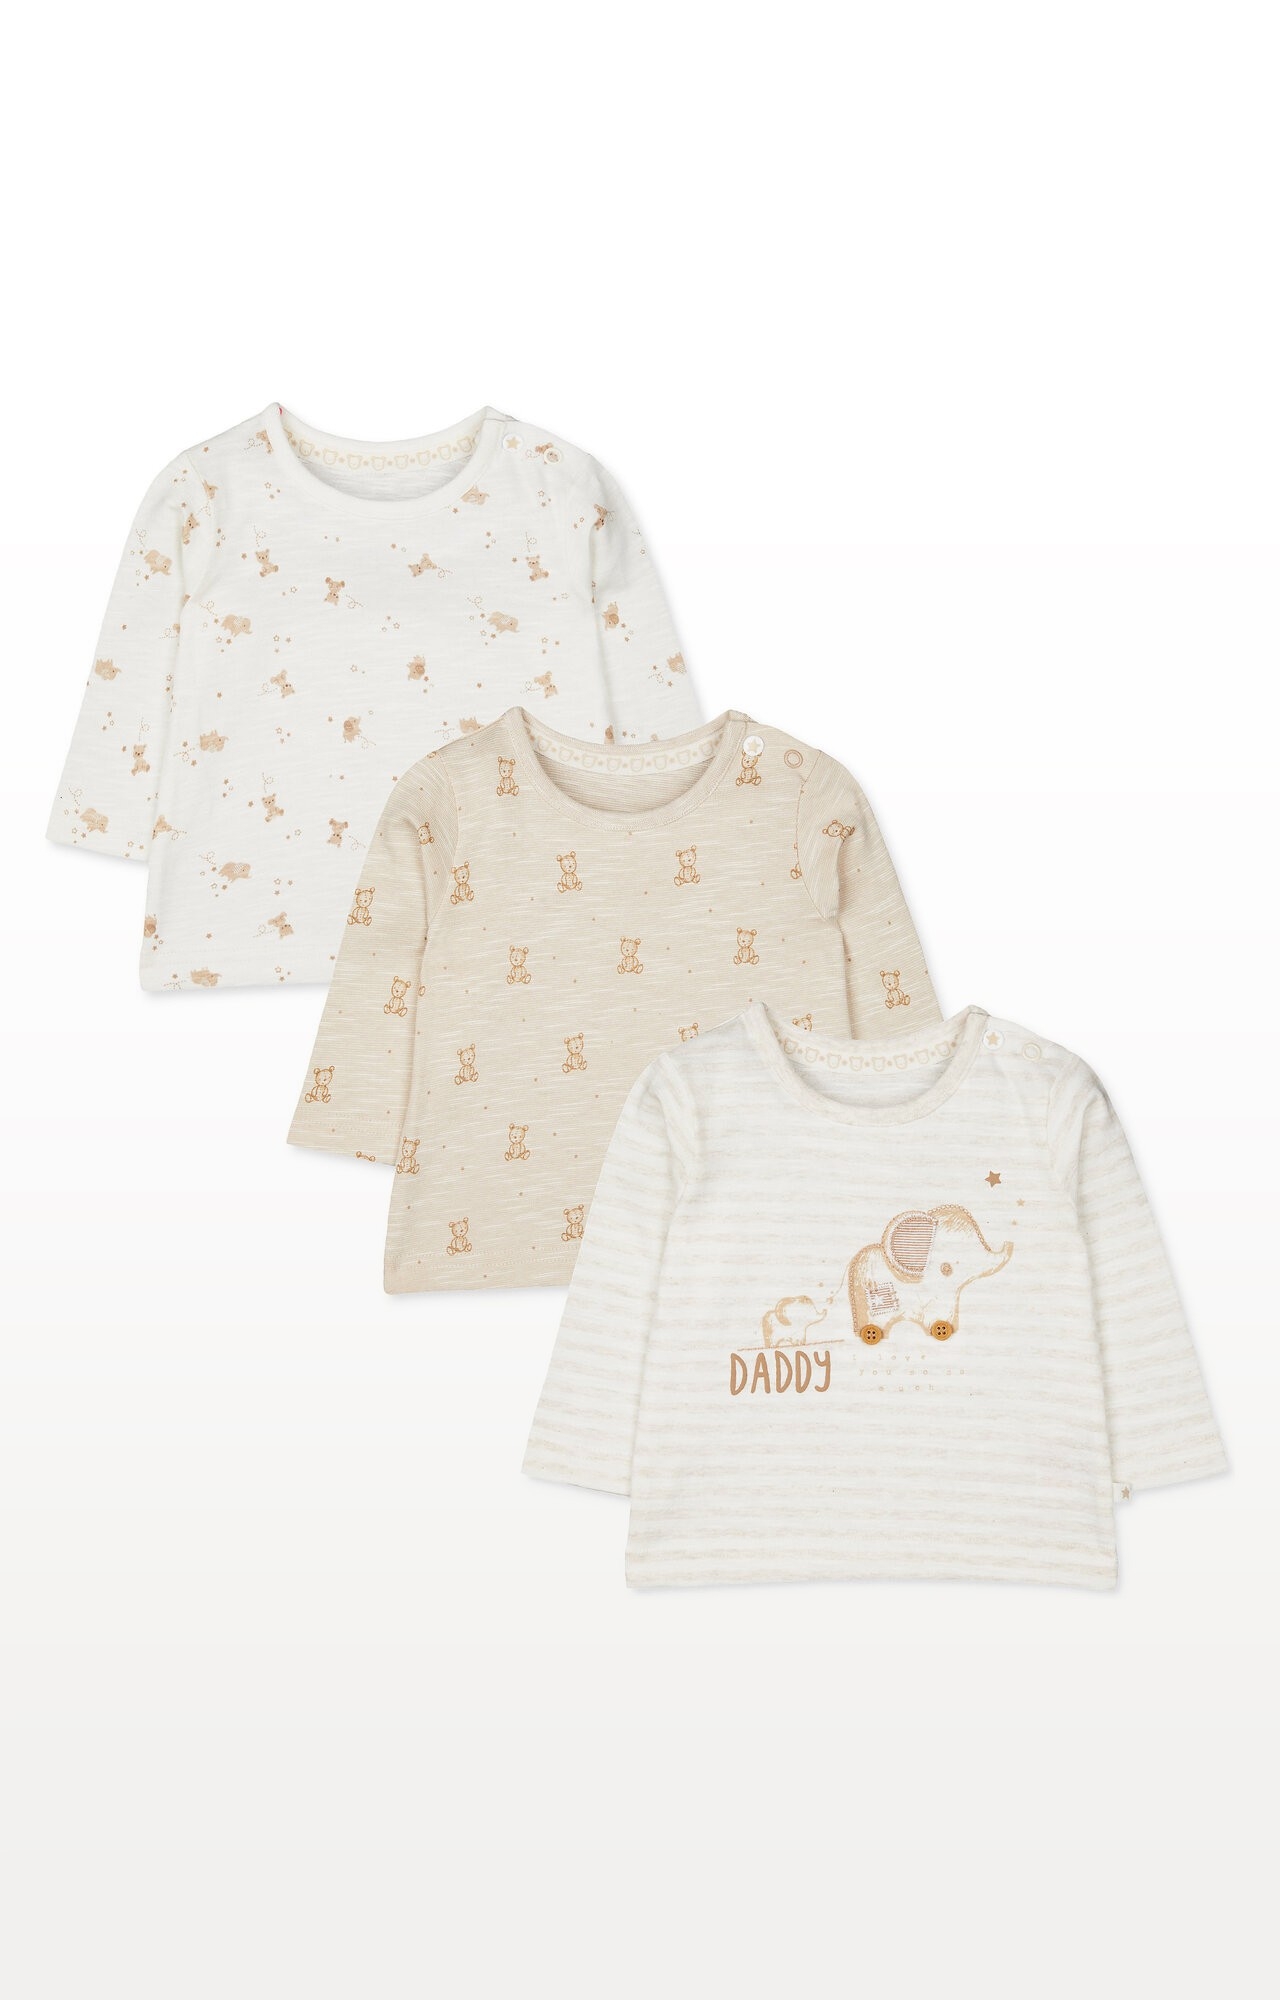 Mothercare | My First Daddy Tops - Pack of 3